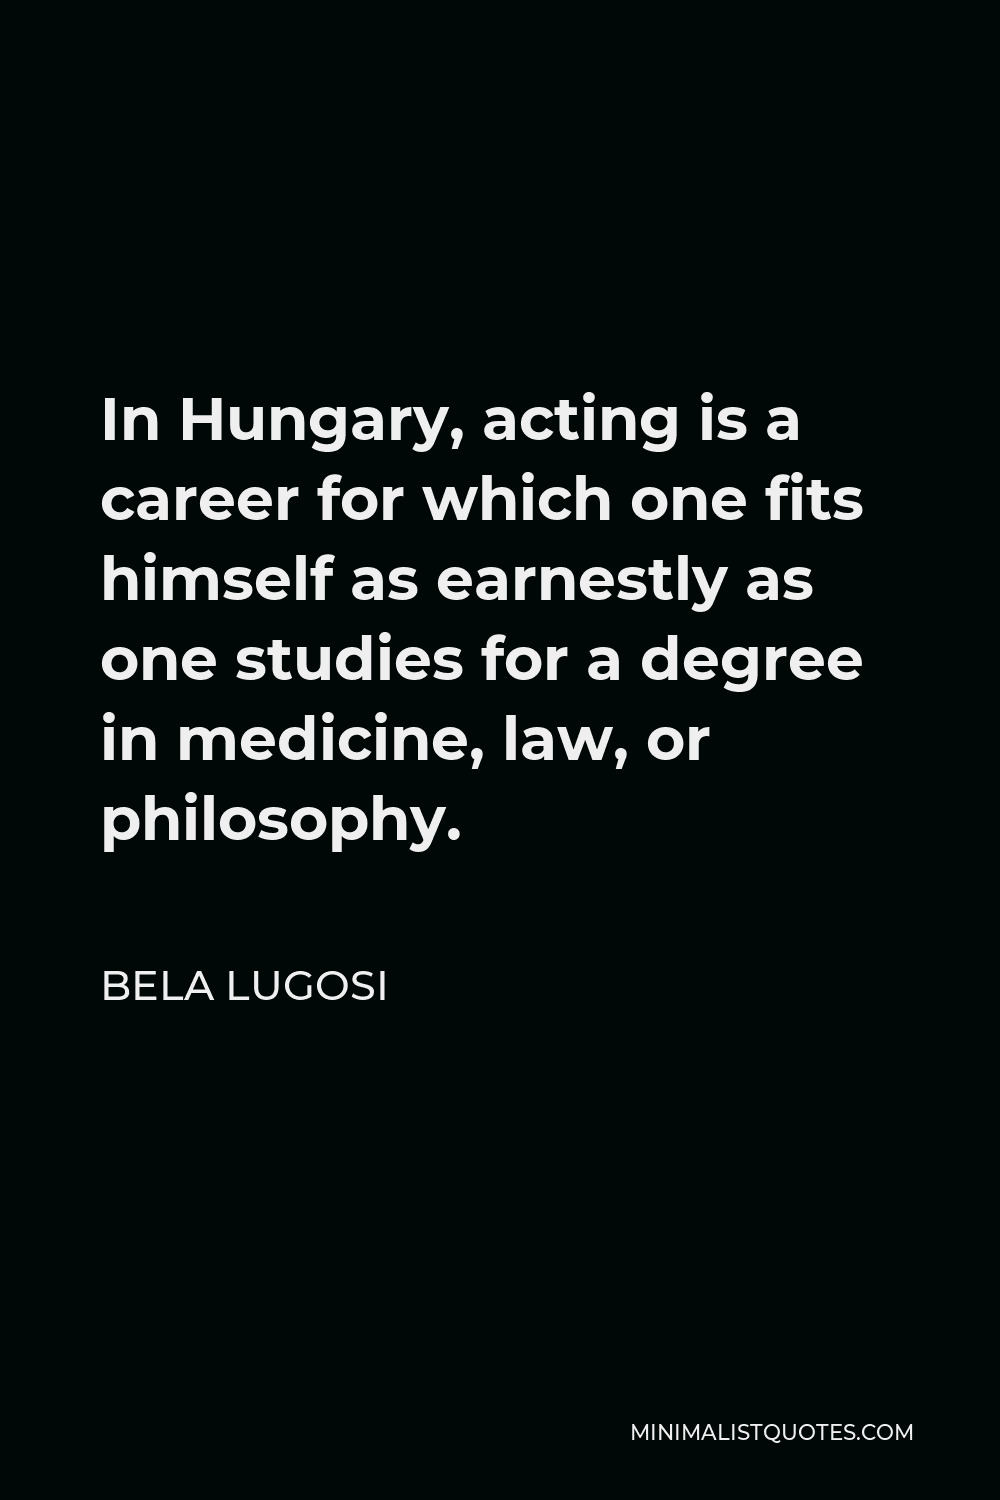 Bela Lugosi Quote - In Hungary, acting is a career for which one fits himself as earnestly as one studies for a degree in medicine, law, or philosophy.